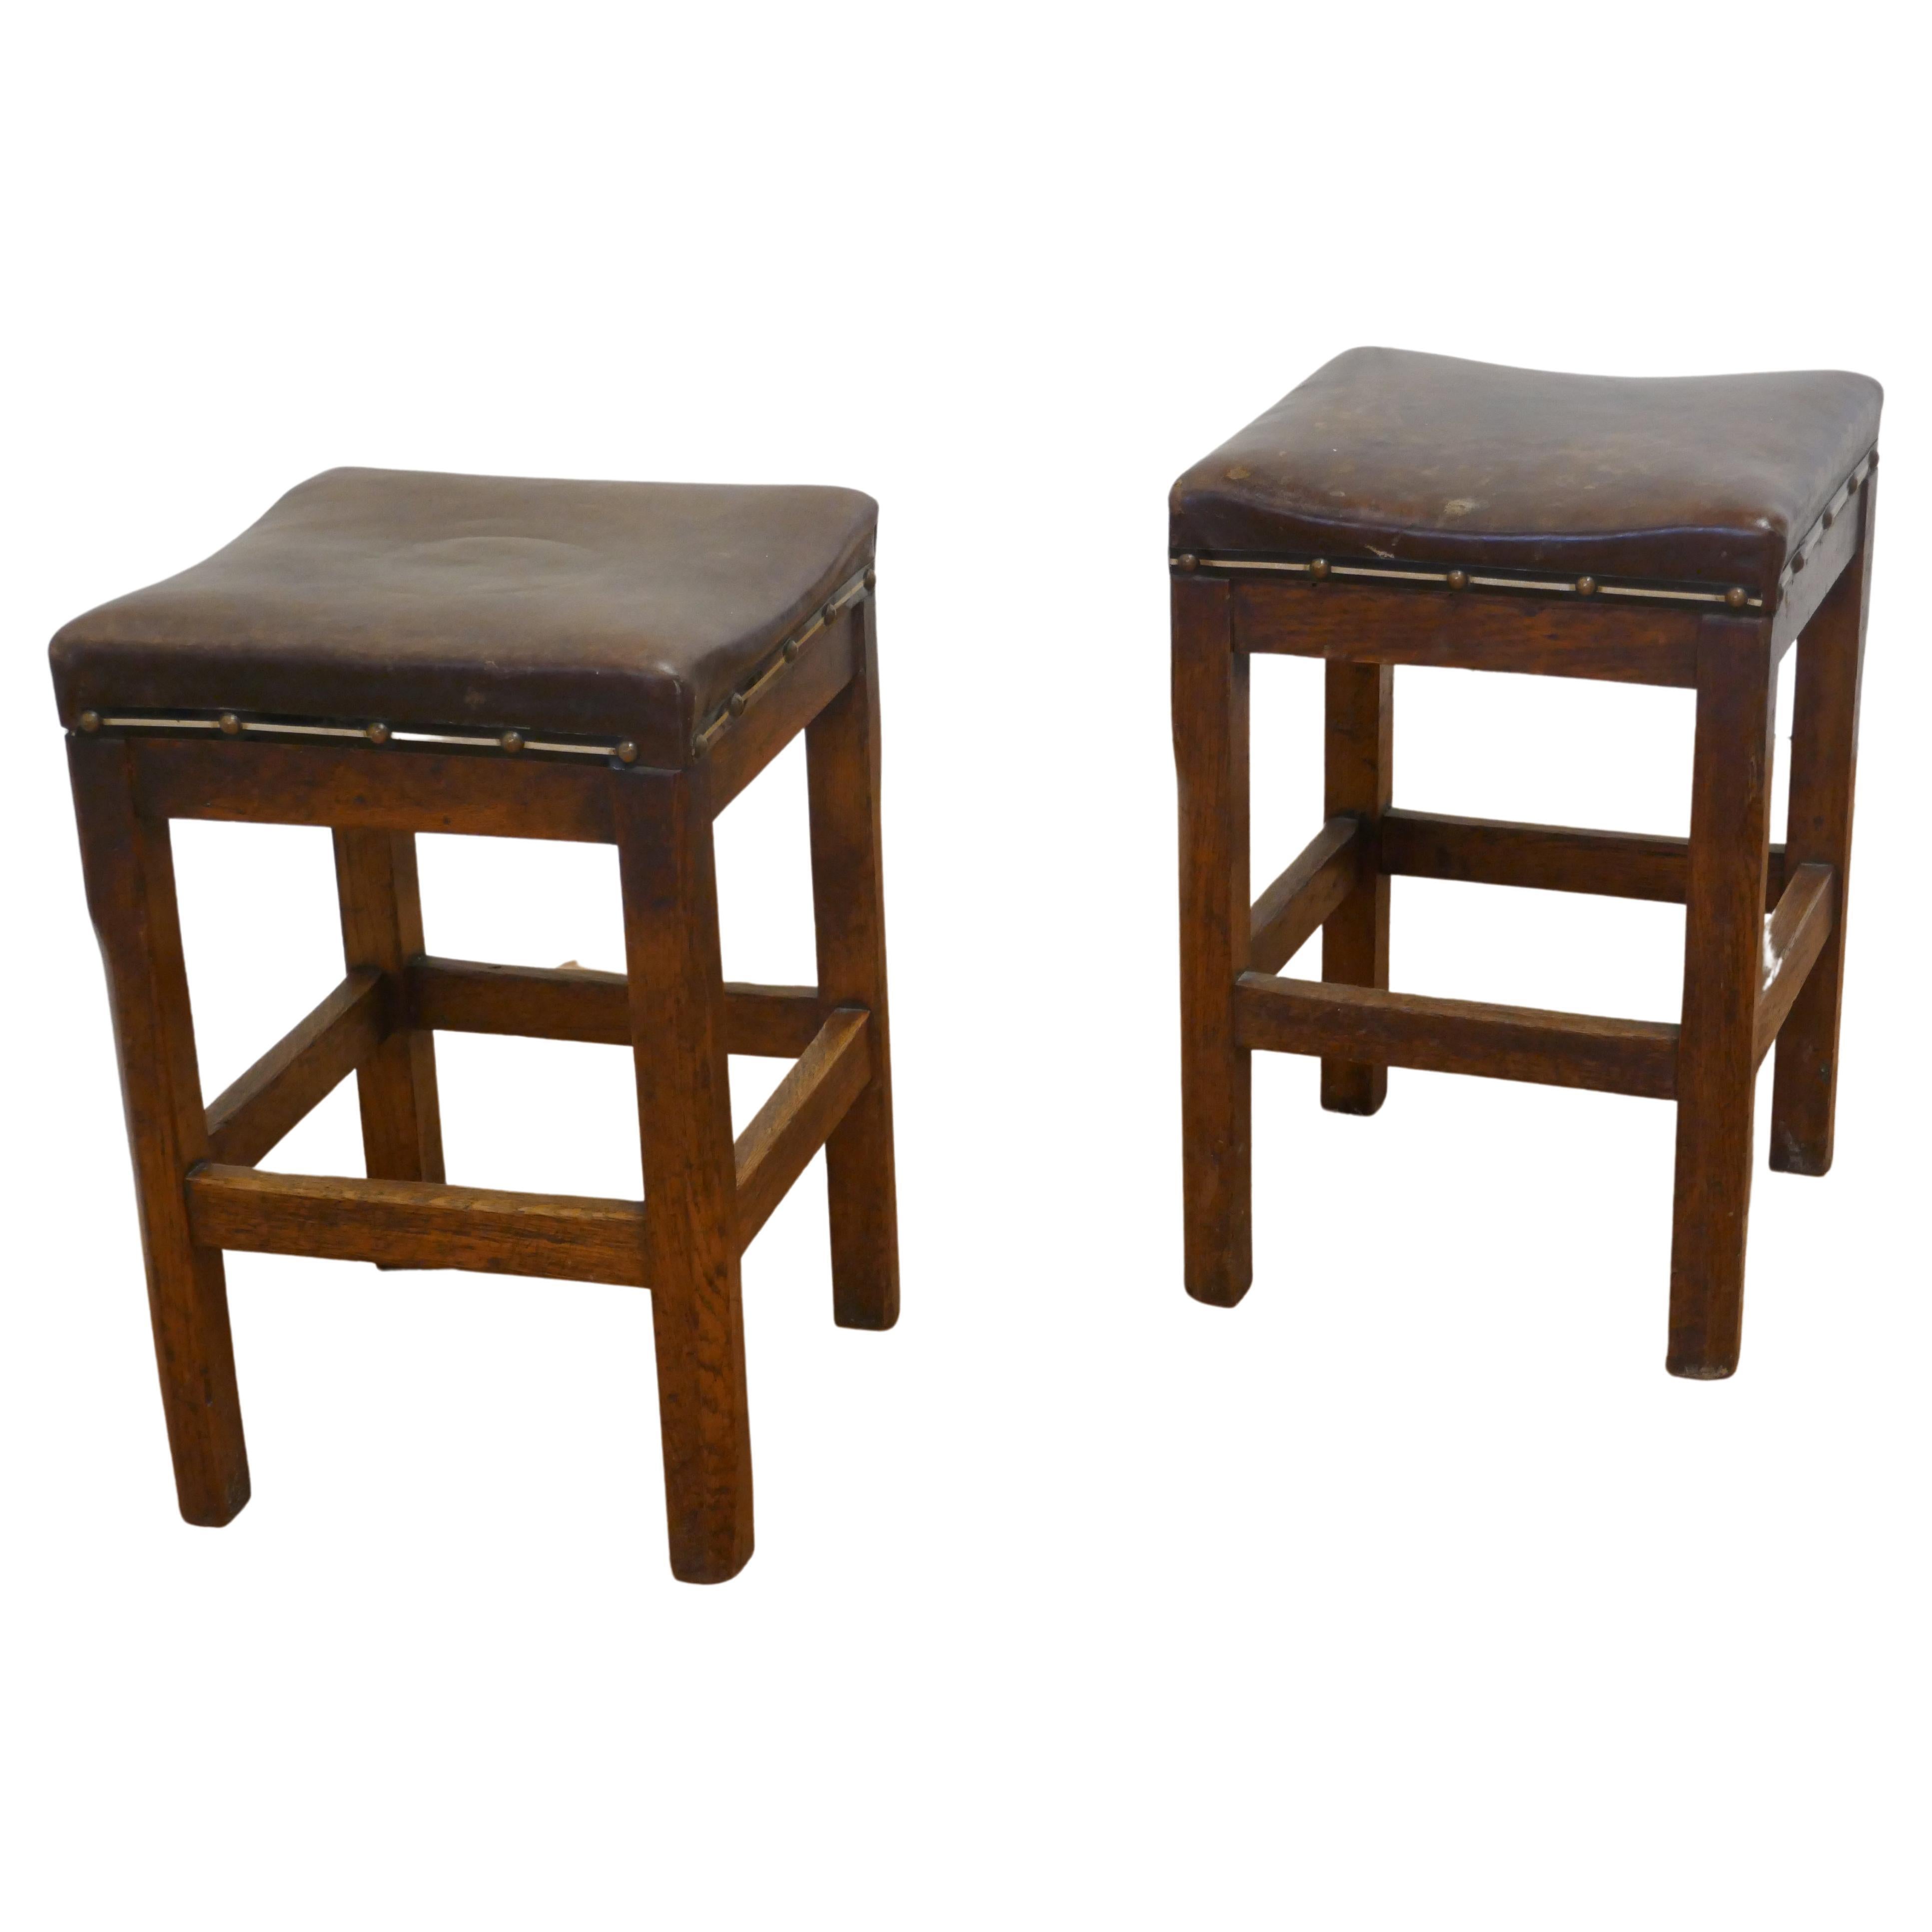 Pair of Arts and Crafts Golden Oak and Leather Stools For Sale